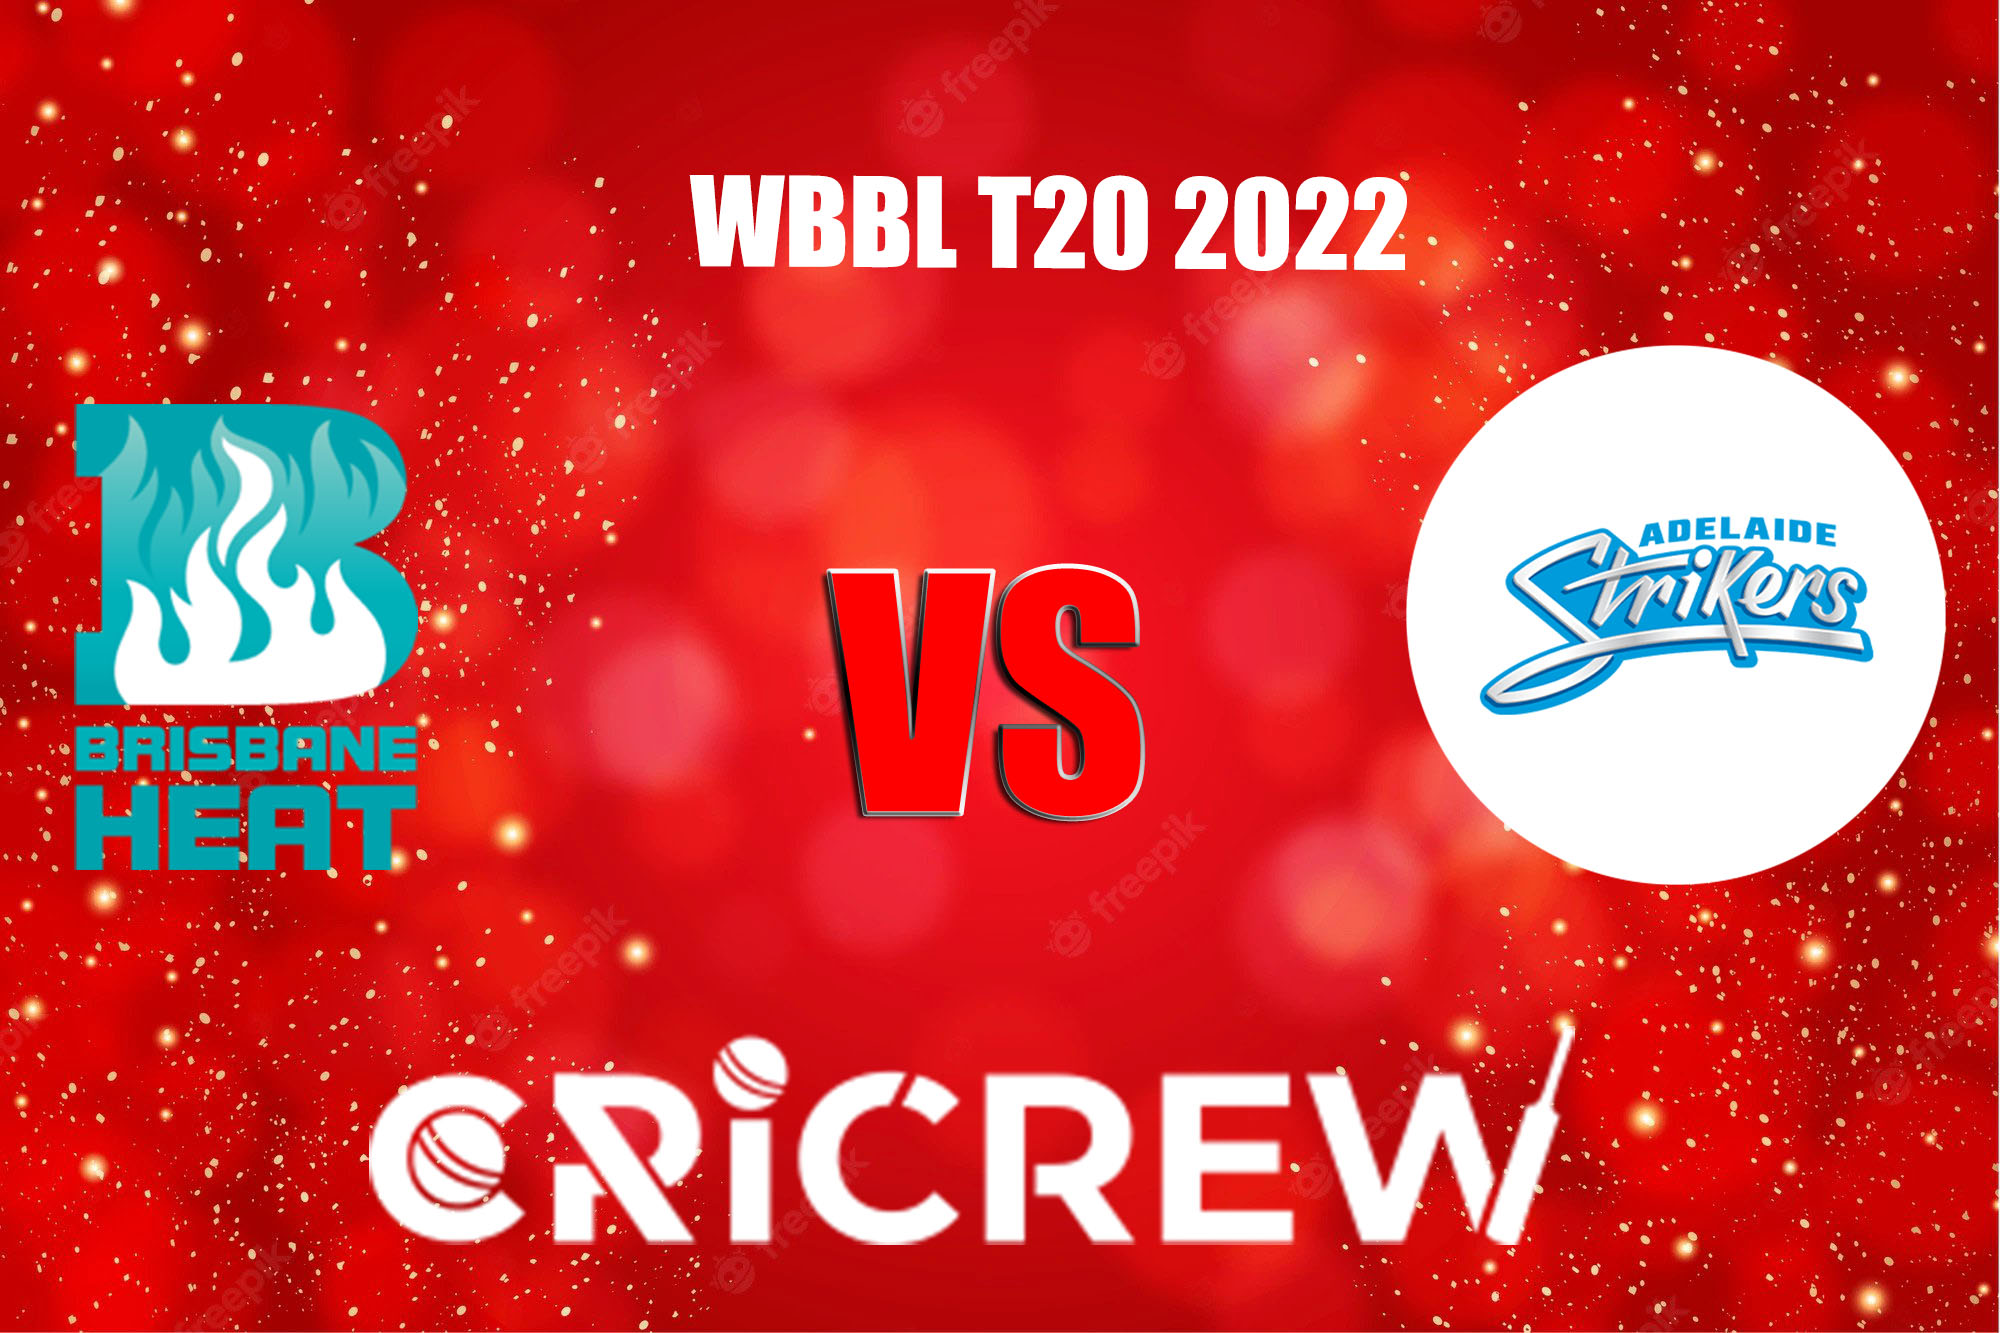 AS-W vs BH-W Live Score starts on 24 Nov 2022, Thur, 1:40 PM IST,. Montjuïc Olympic Ground, Barcelona. Here on www.cricrew.com you can find all Live, Upcoming ..